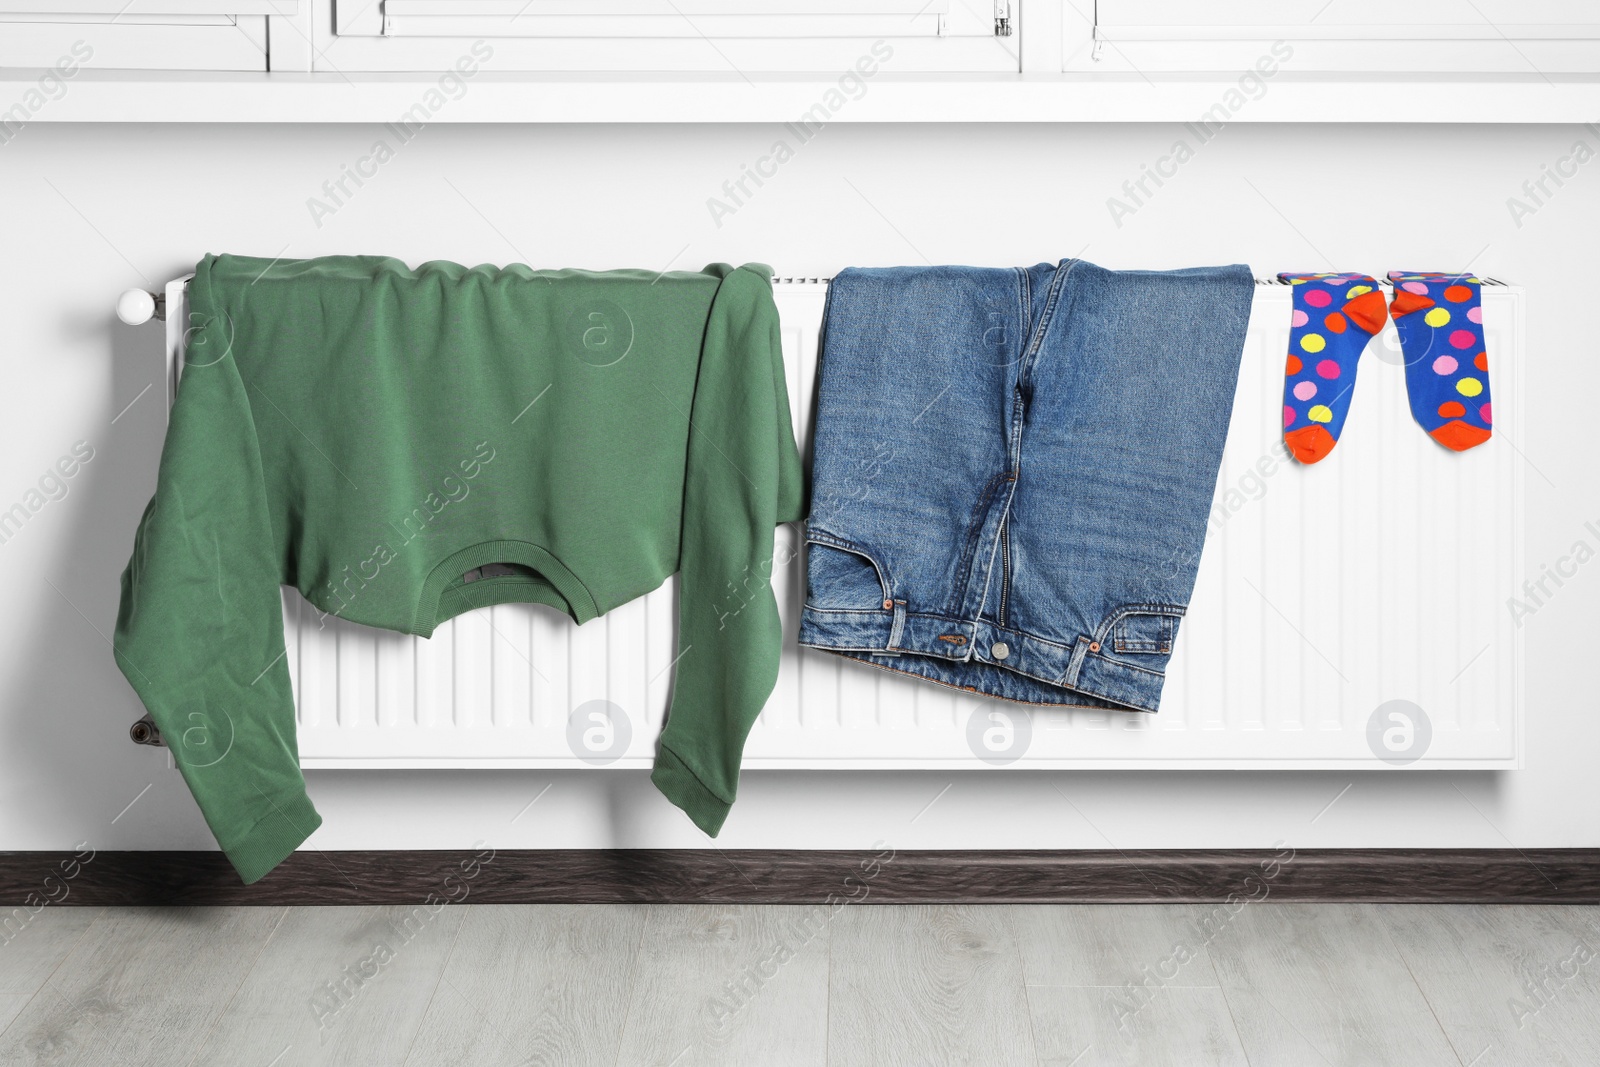 Photo of Clothes hanging on white radiator in room